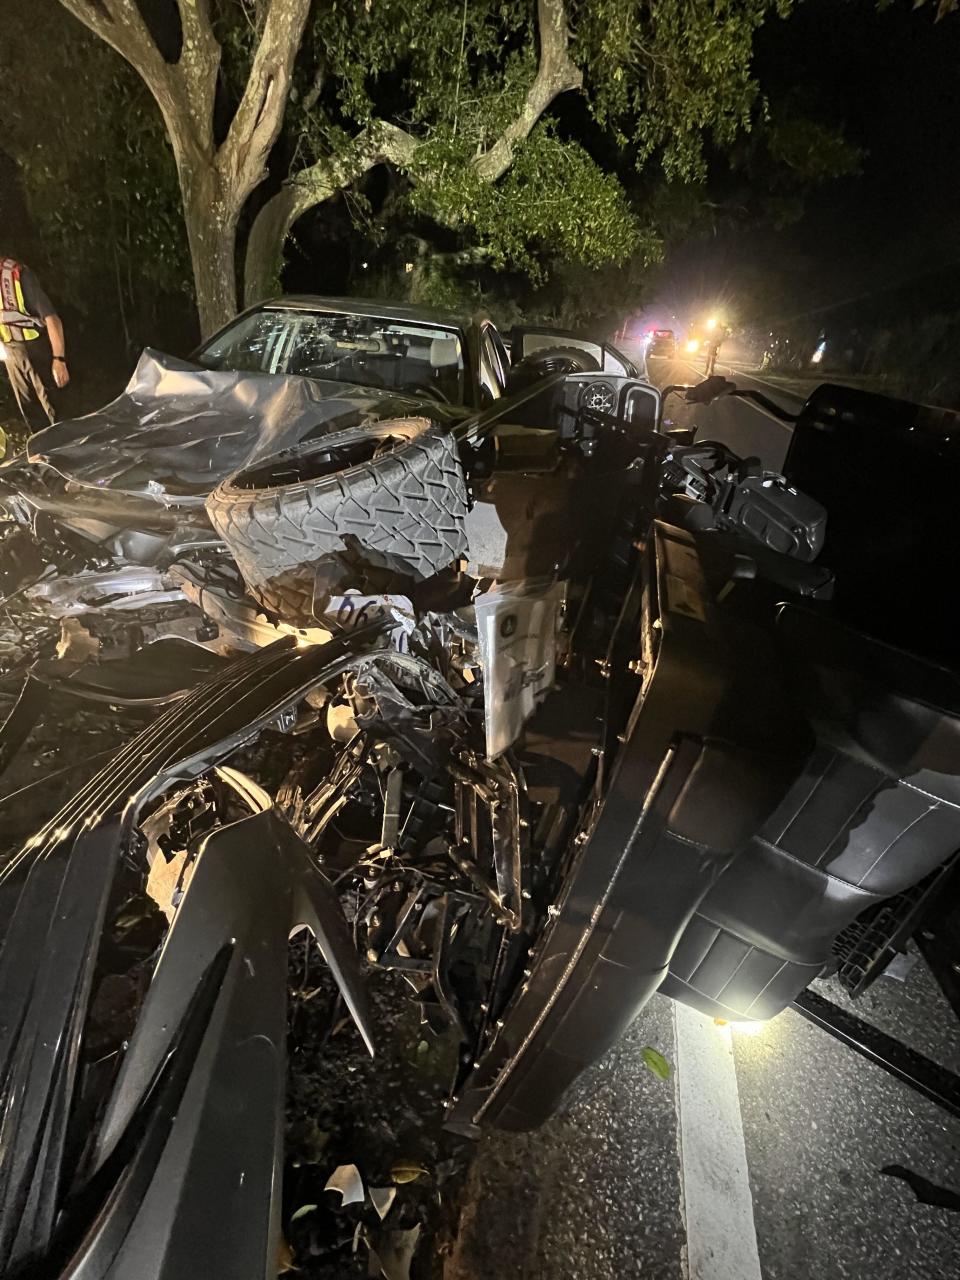 Photos of the rental car Komoroski, 25, was allegedly driving 65 miles per hour in a 25-mile-per-hour zone before slamming into a golf cart.  / Credit: Folly Beach Department of Public Safety